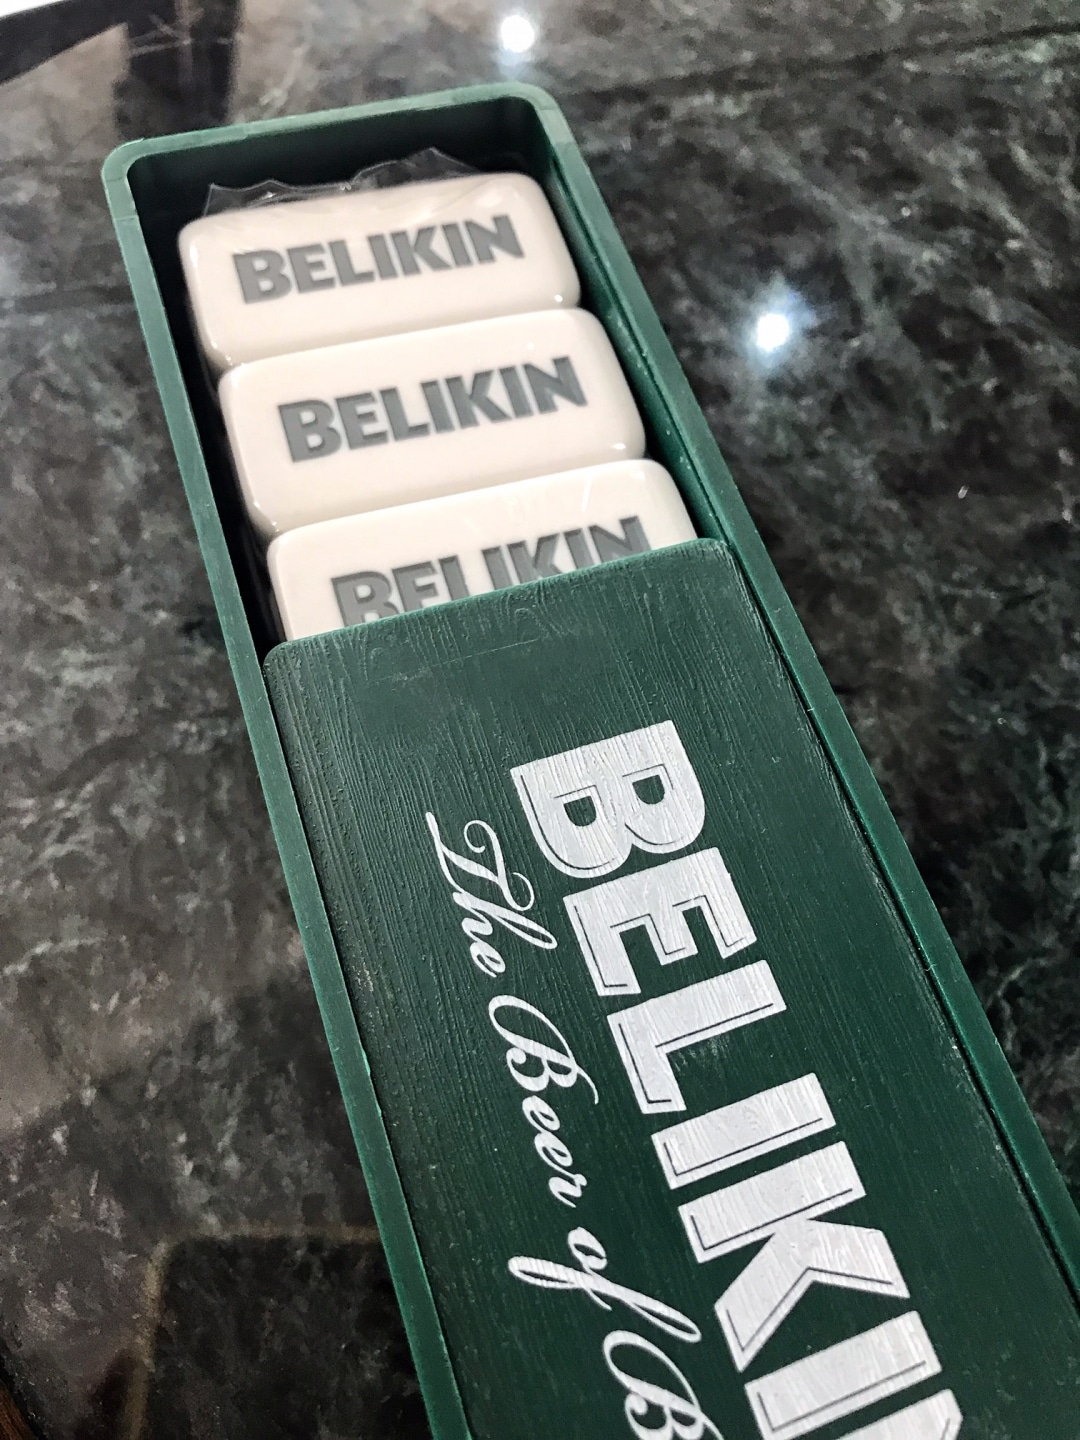 Dominos from the Belikin store